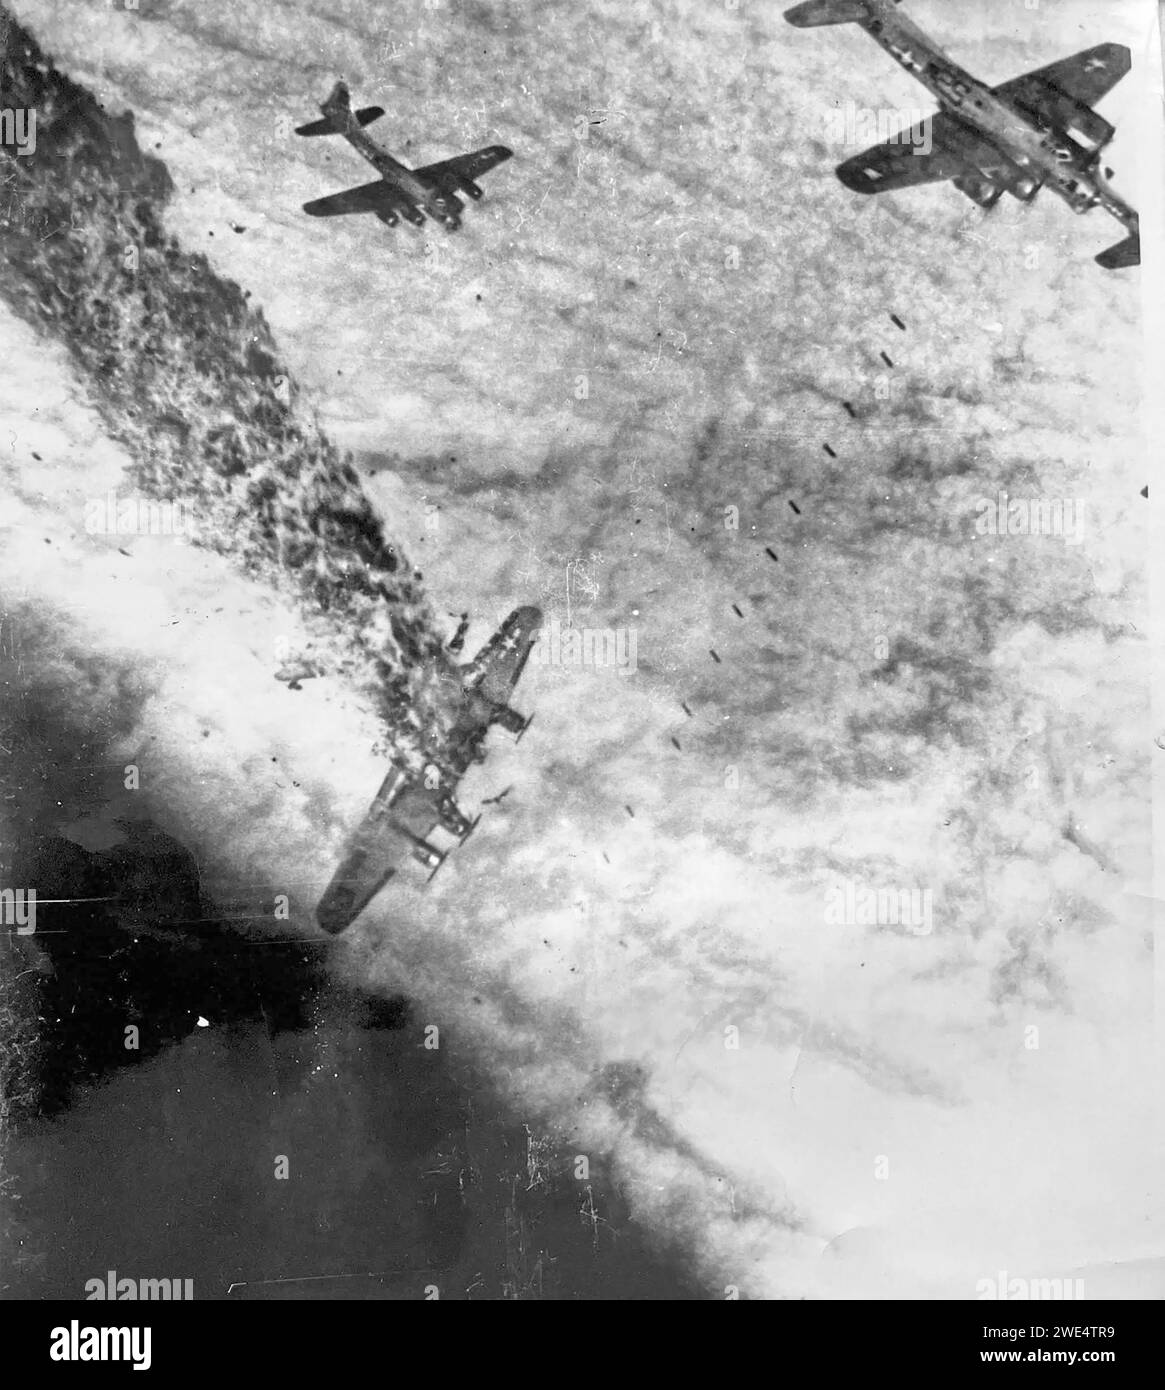 BOEING B-17G  of the  USAAF  834th Bombardment  Squadron flying from RAF Sudbury, England,  takes a direct hit from flak on a mission over Germany on 2 November 1944. The other aircraft are dropping bombs through cloud after the target was conformed by the master bomber. Photo taken by  S/Sgt Bill Stewart from his waist window. Stock Photo